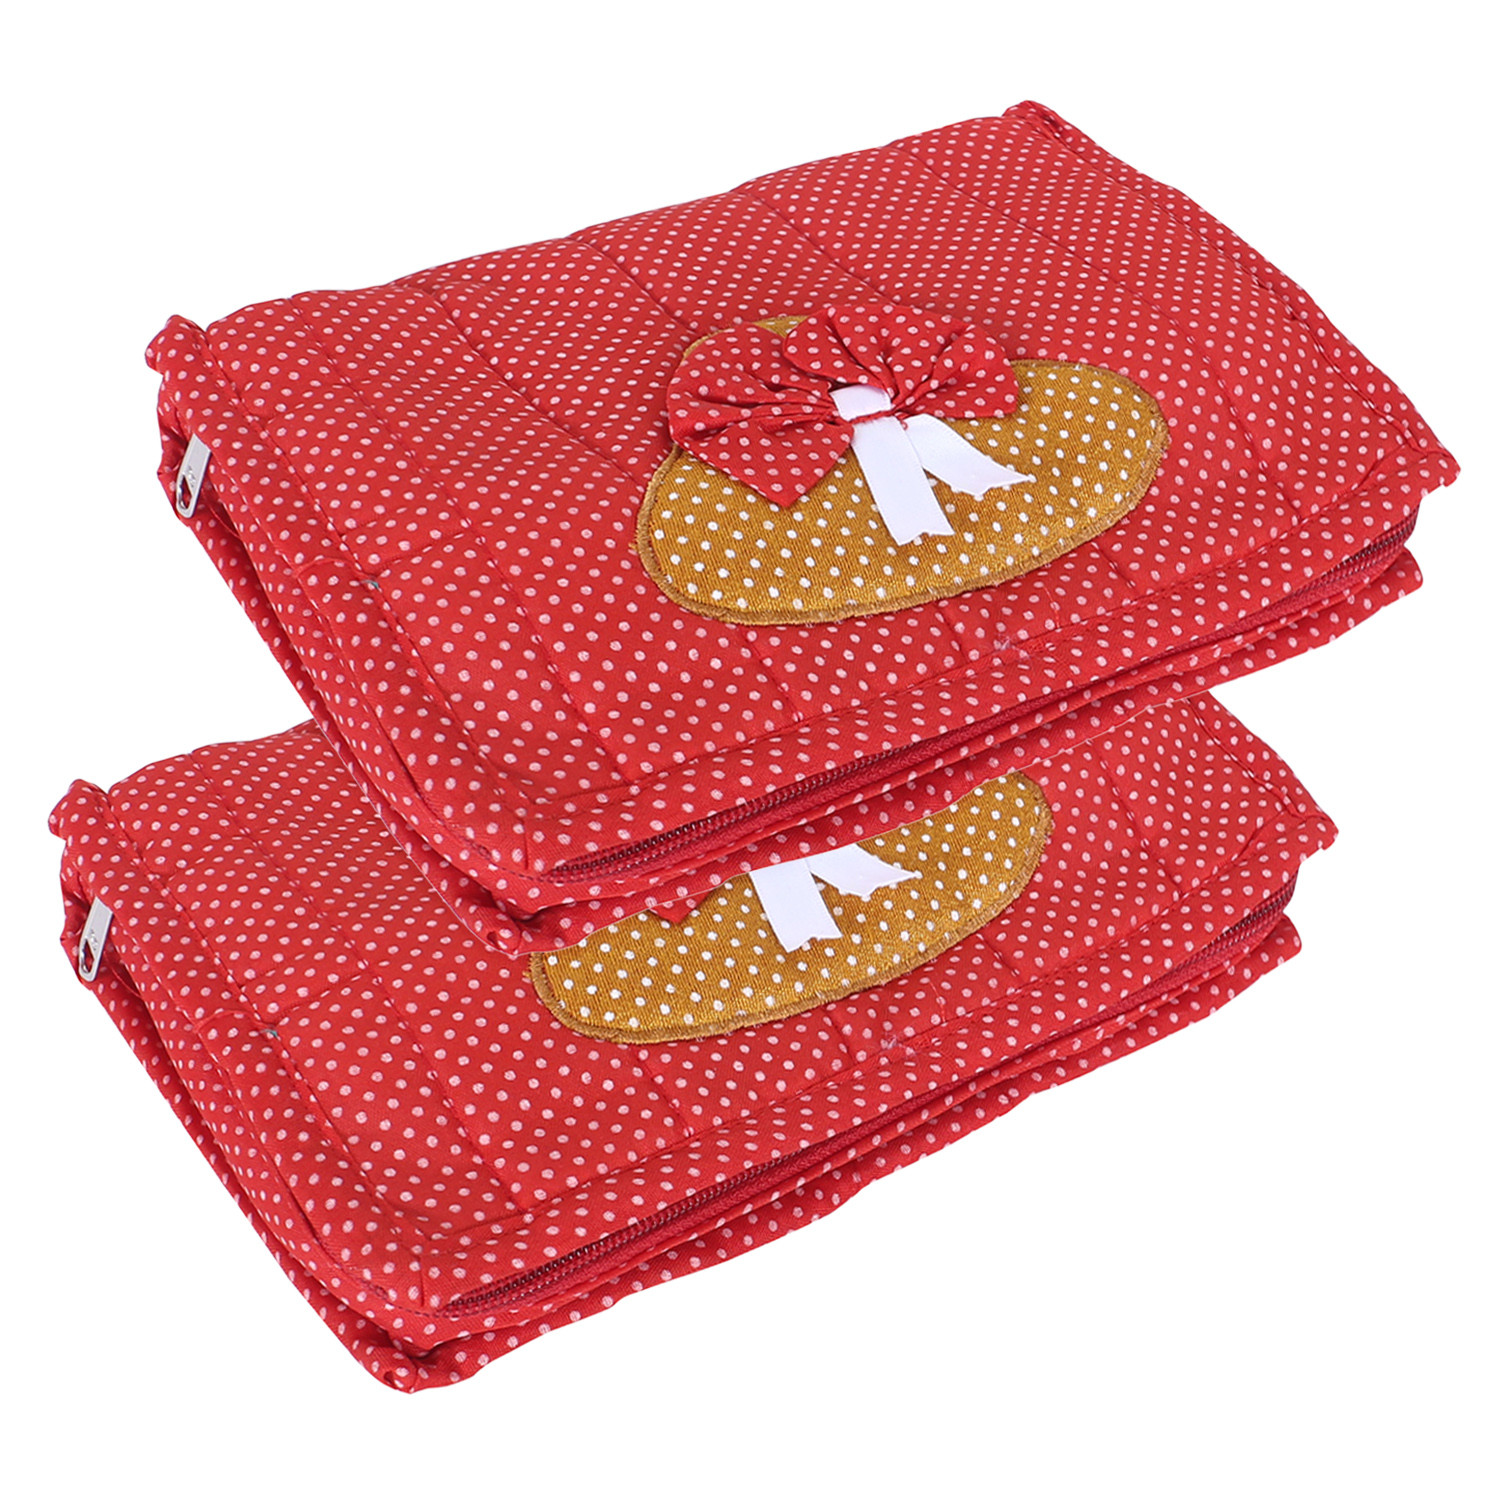 Kuber Industries Jewellery Kit | Cotton Bow Dot Print Travel Kit | 7 Pouch Jewellery Storage Kit | Makeup Organizer for Woman | Red